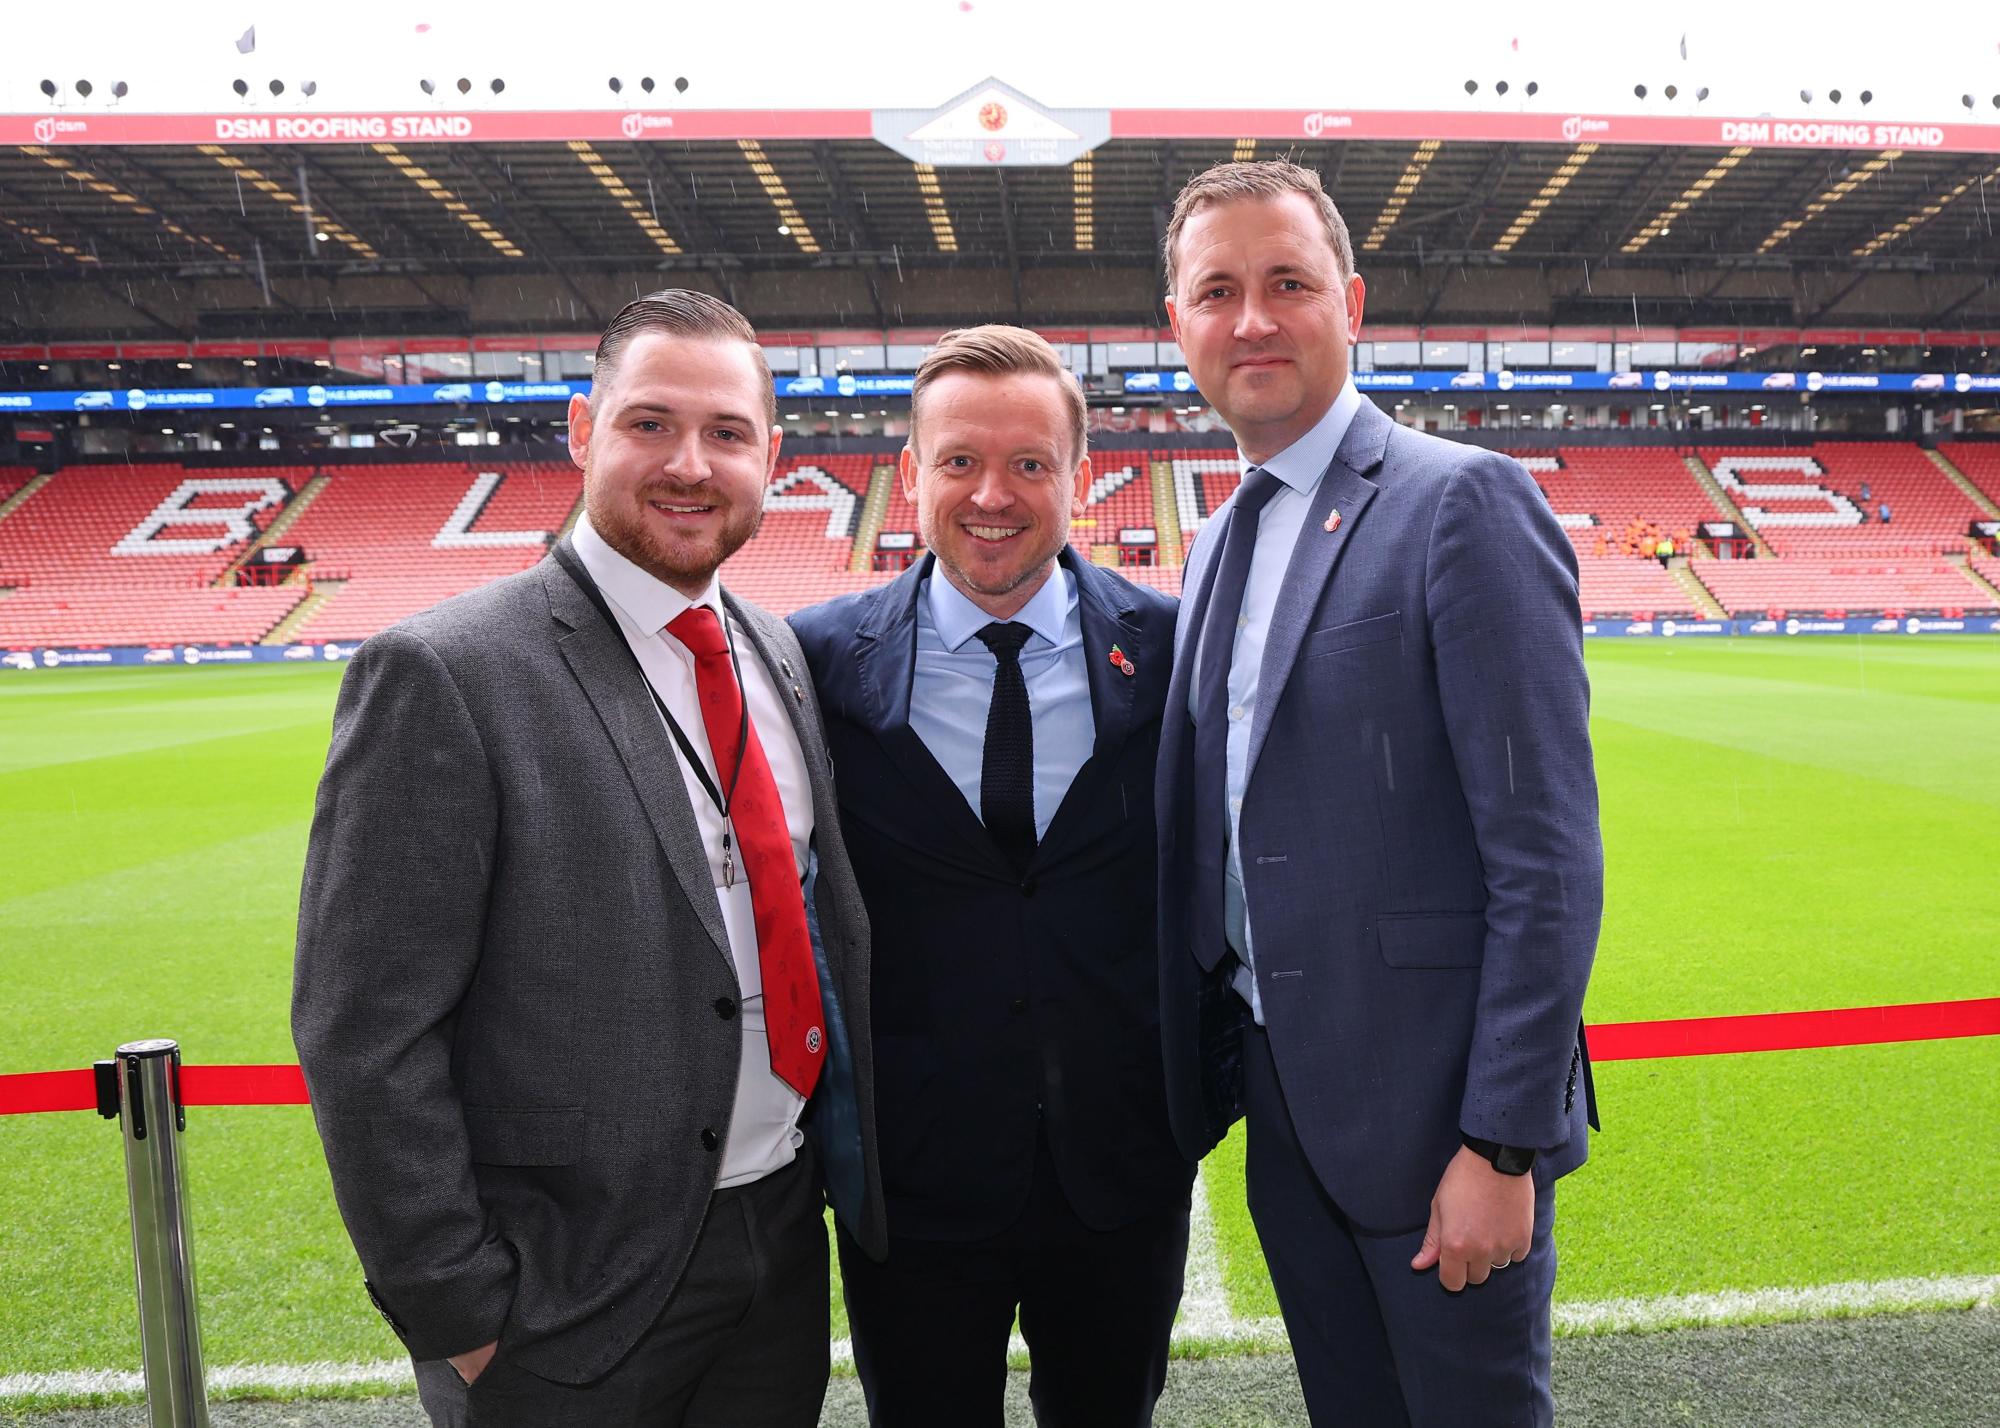 Levy Extends Partnership With Sheffield United Football Club